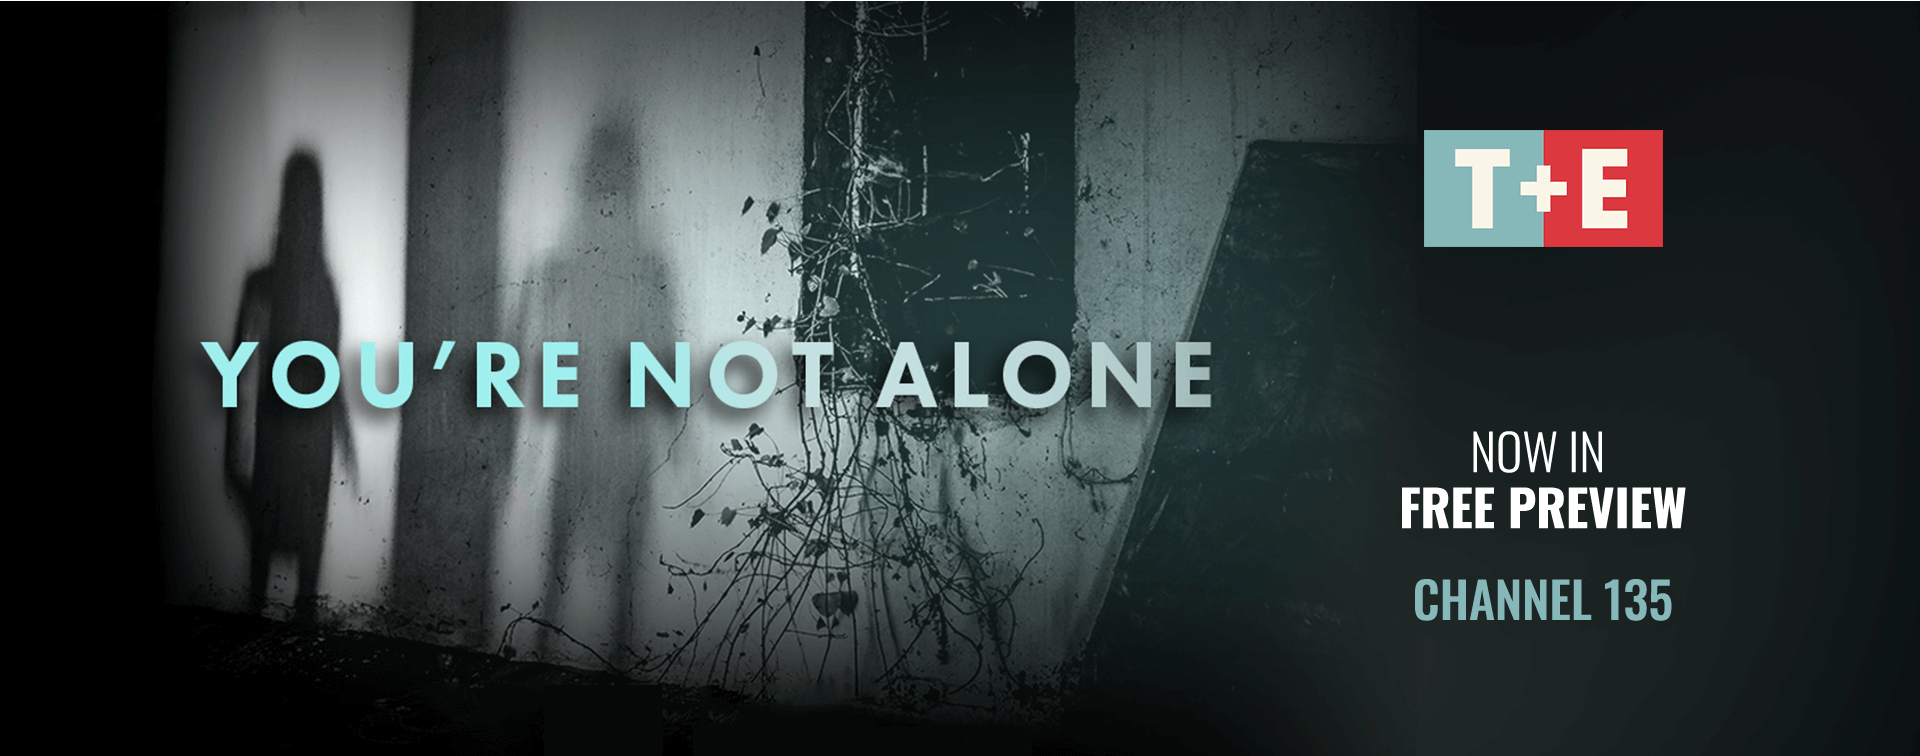 You're Not Alone, now in free preview.